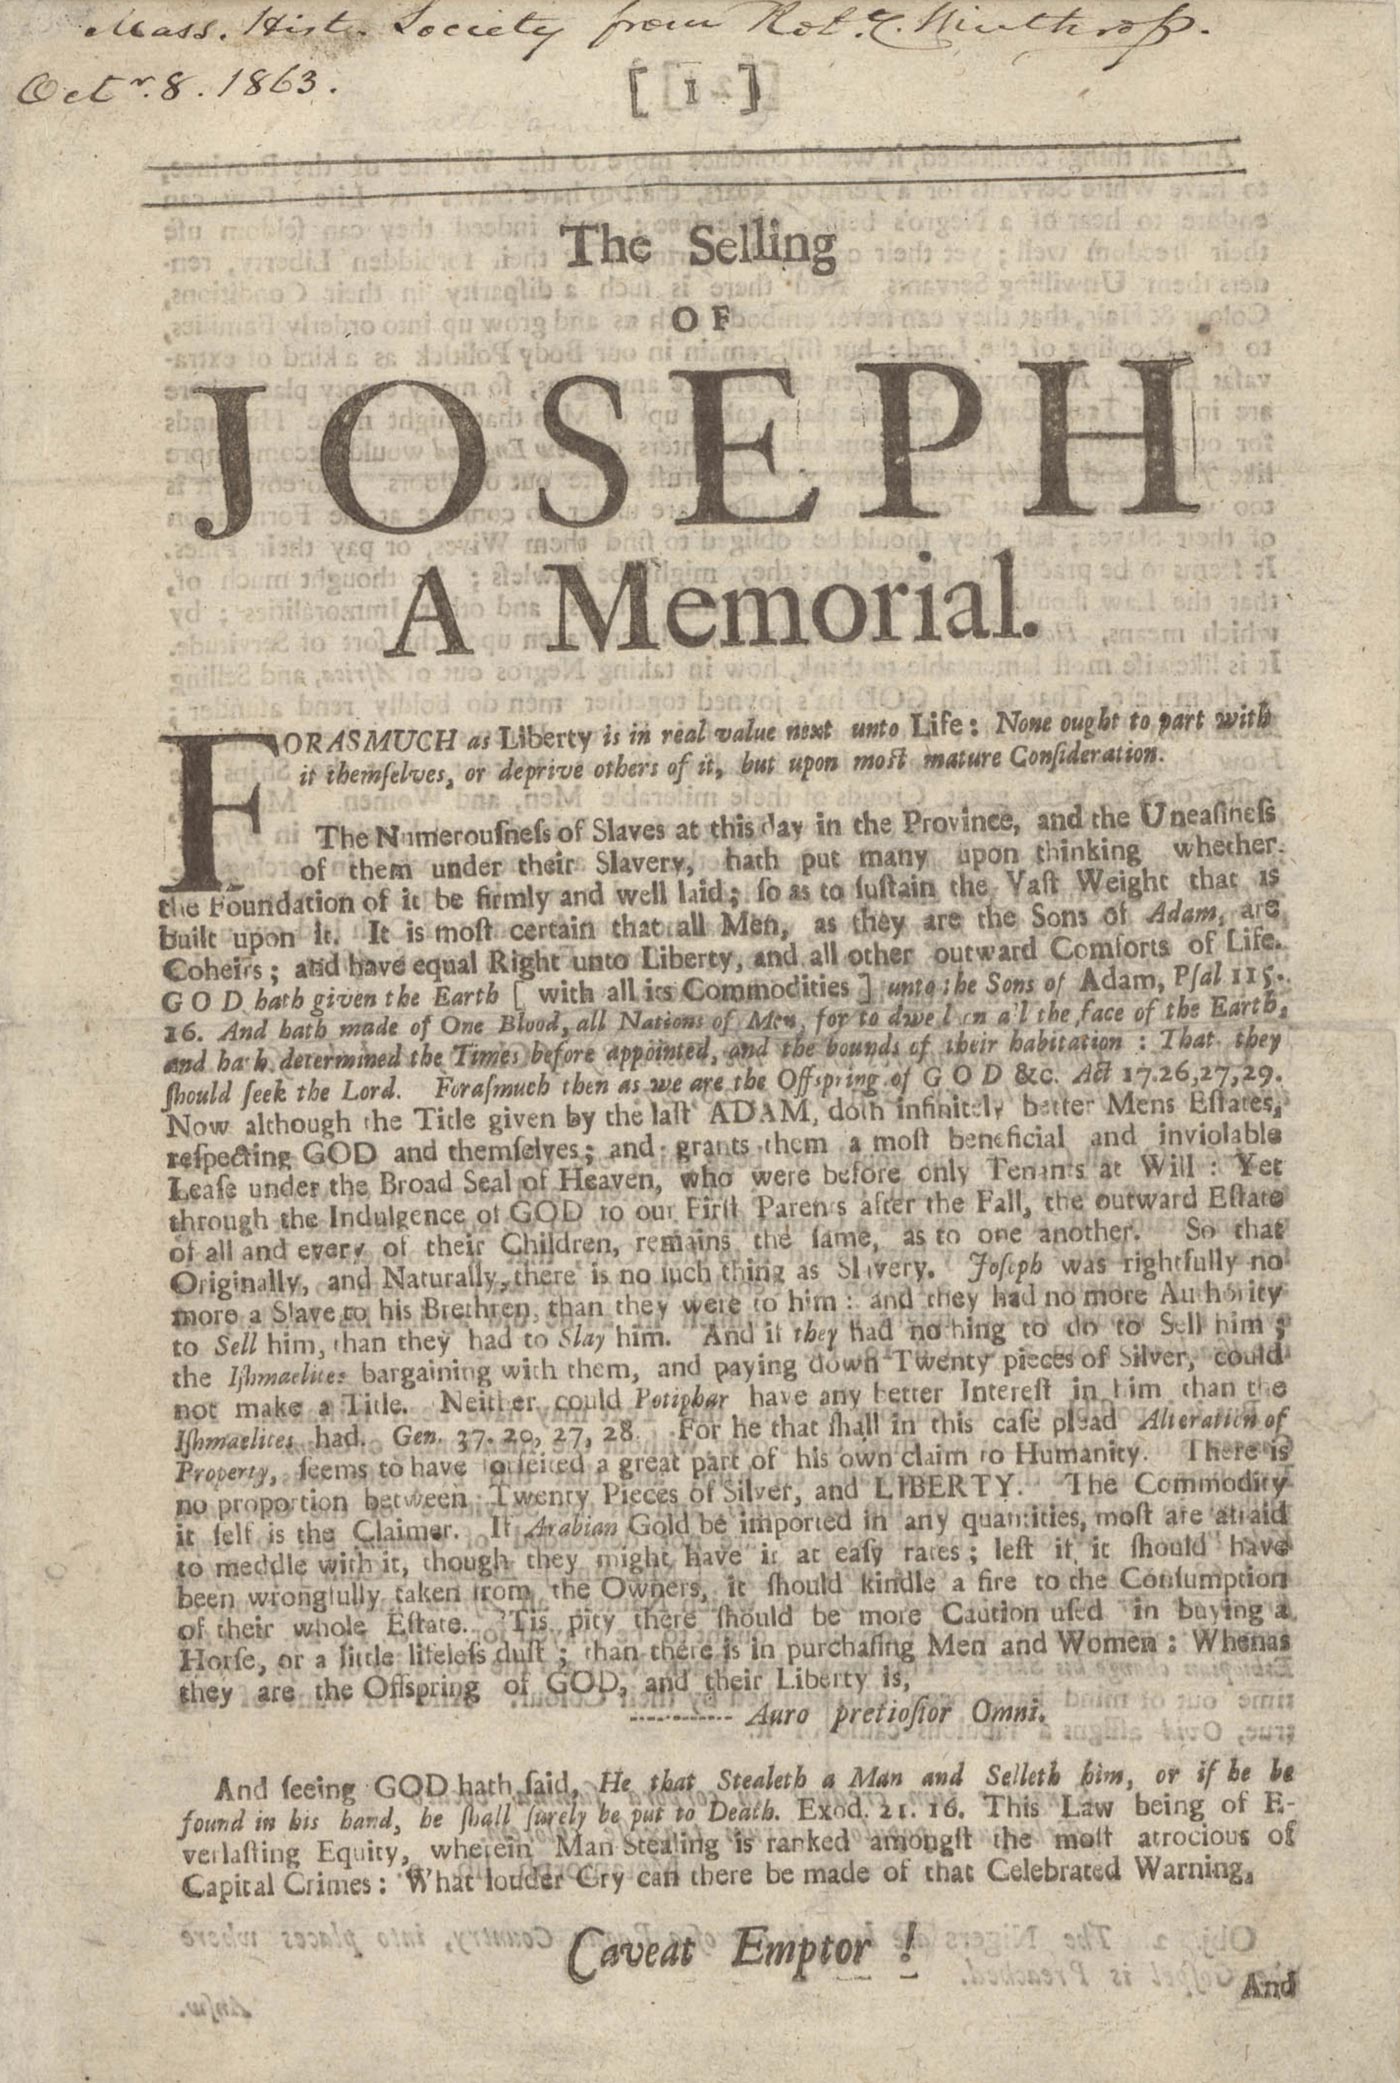 A page from The Selling of Joseph